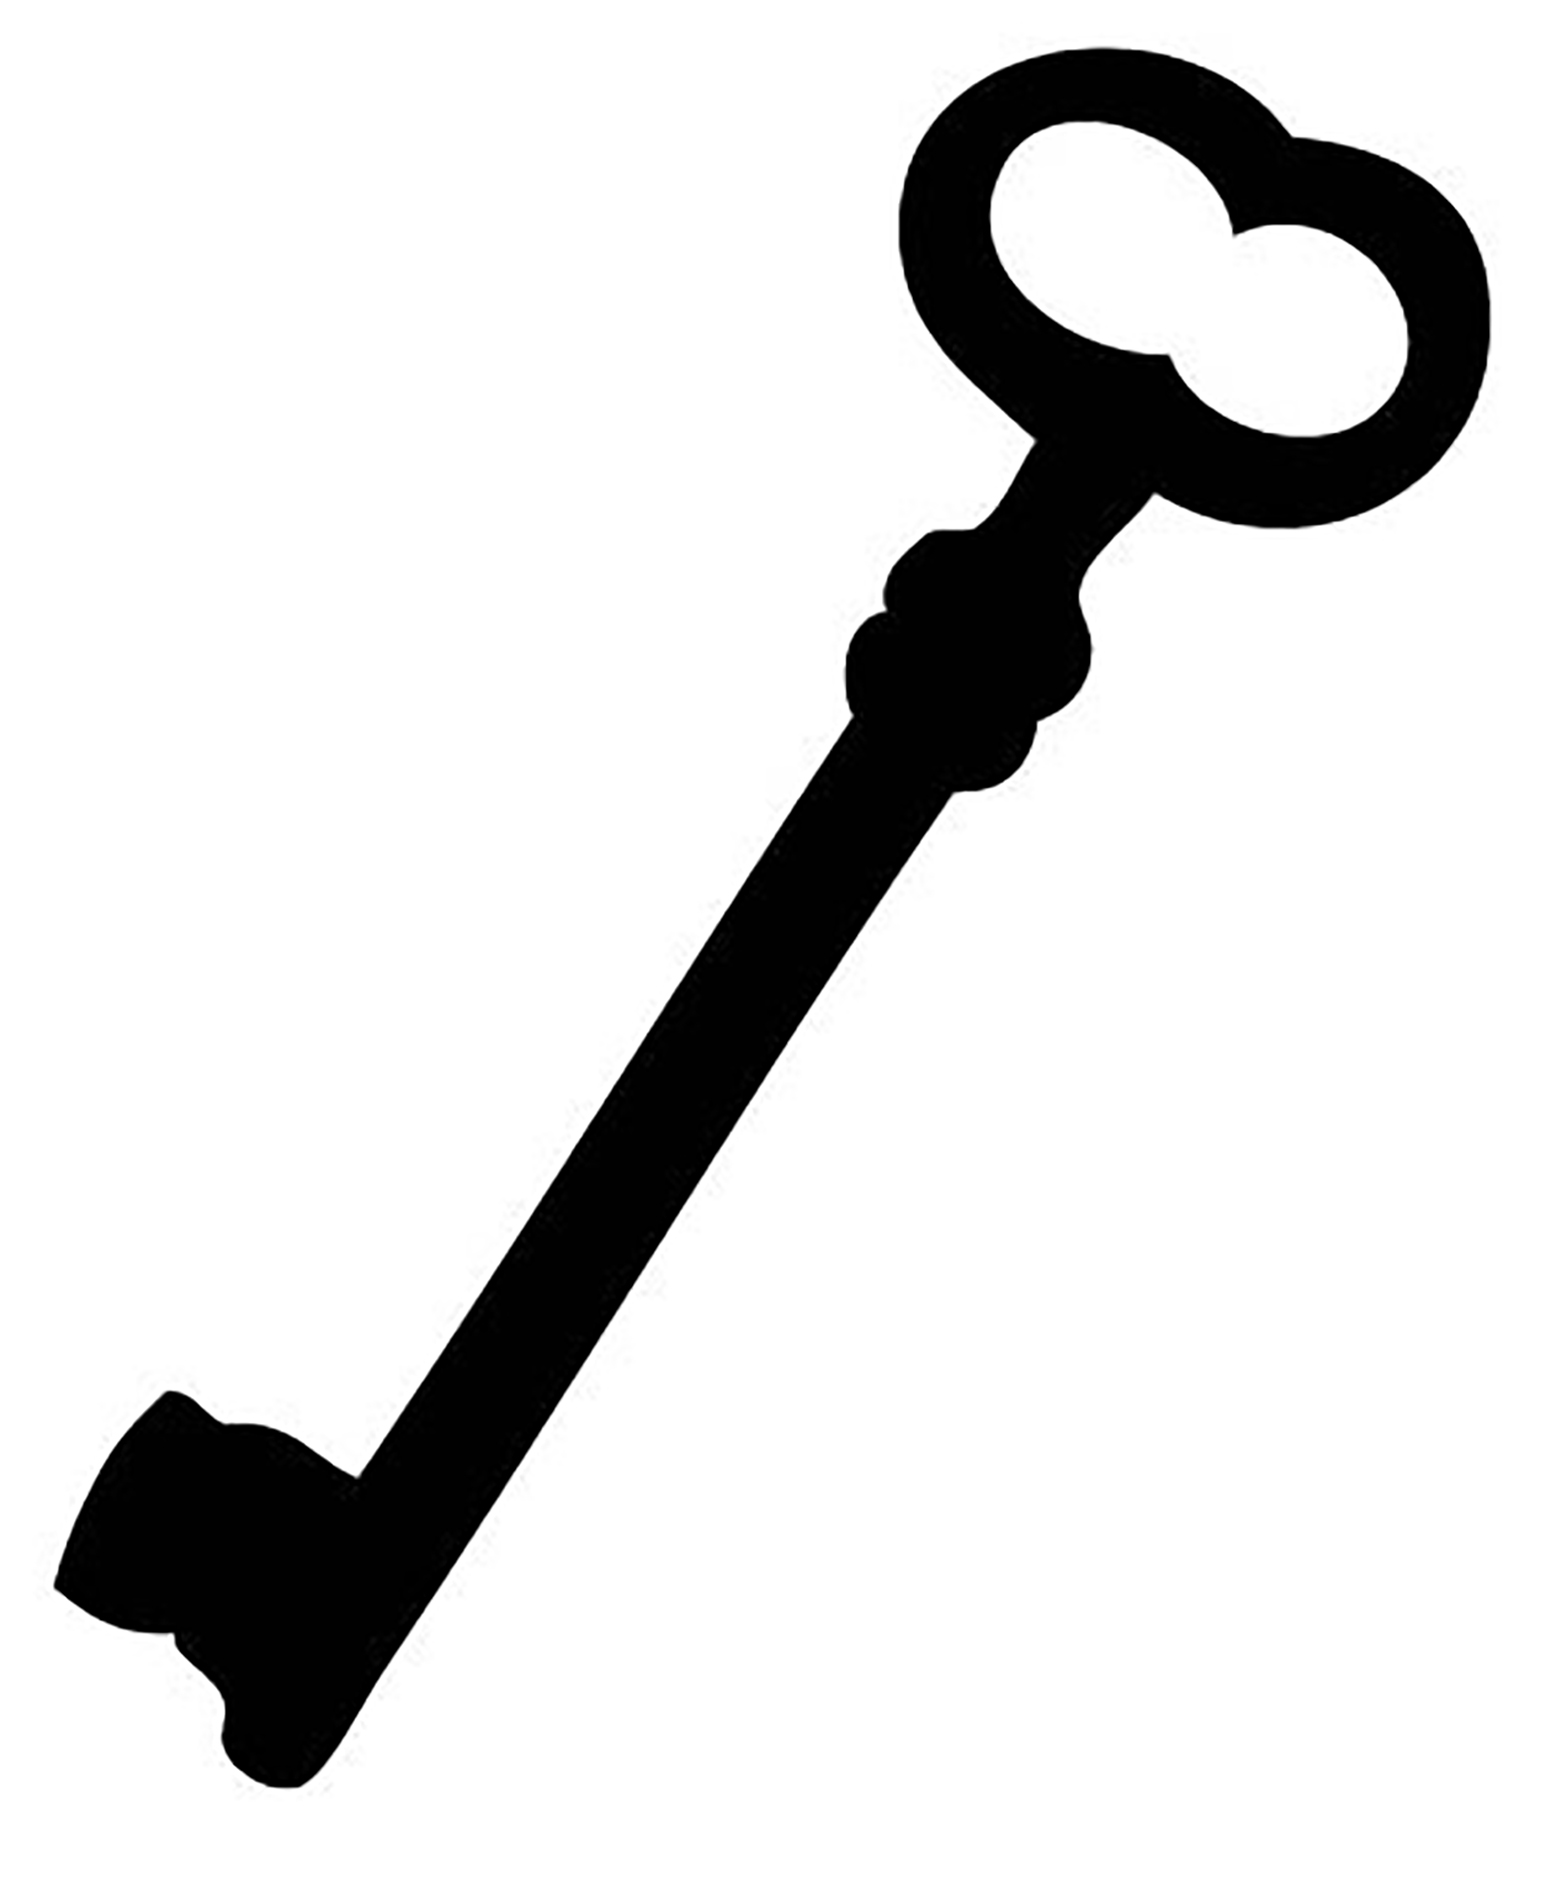 12 Skeleton Key Clipart Images and Locks! - The Graphics Fairy